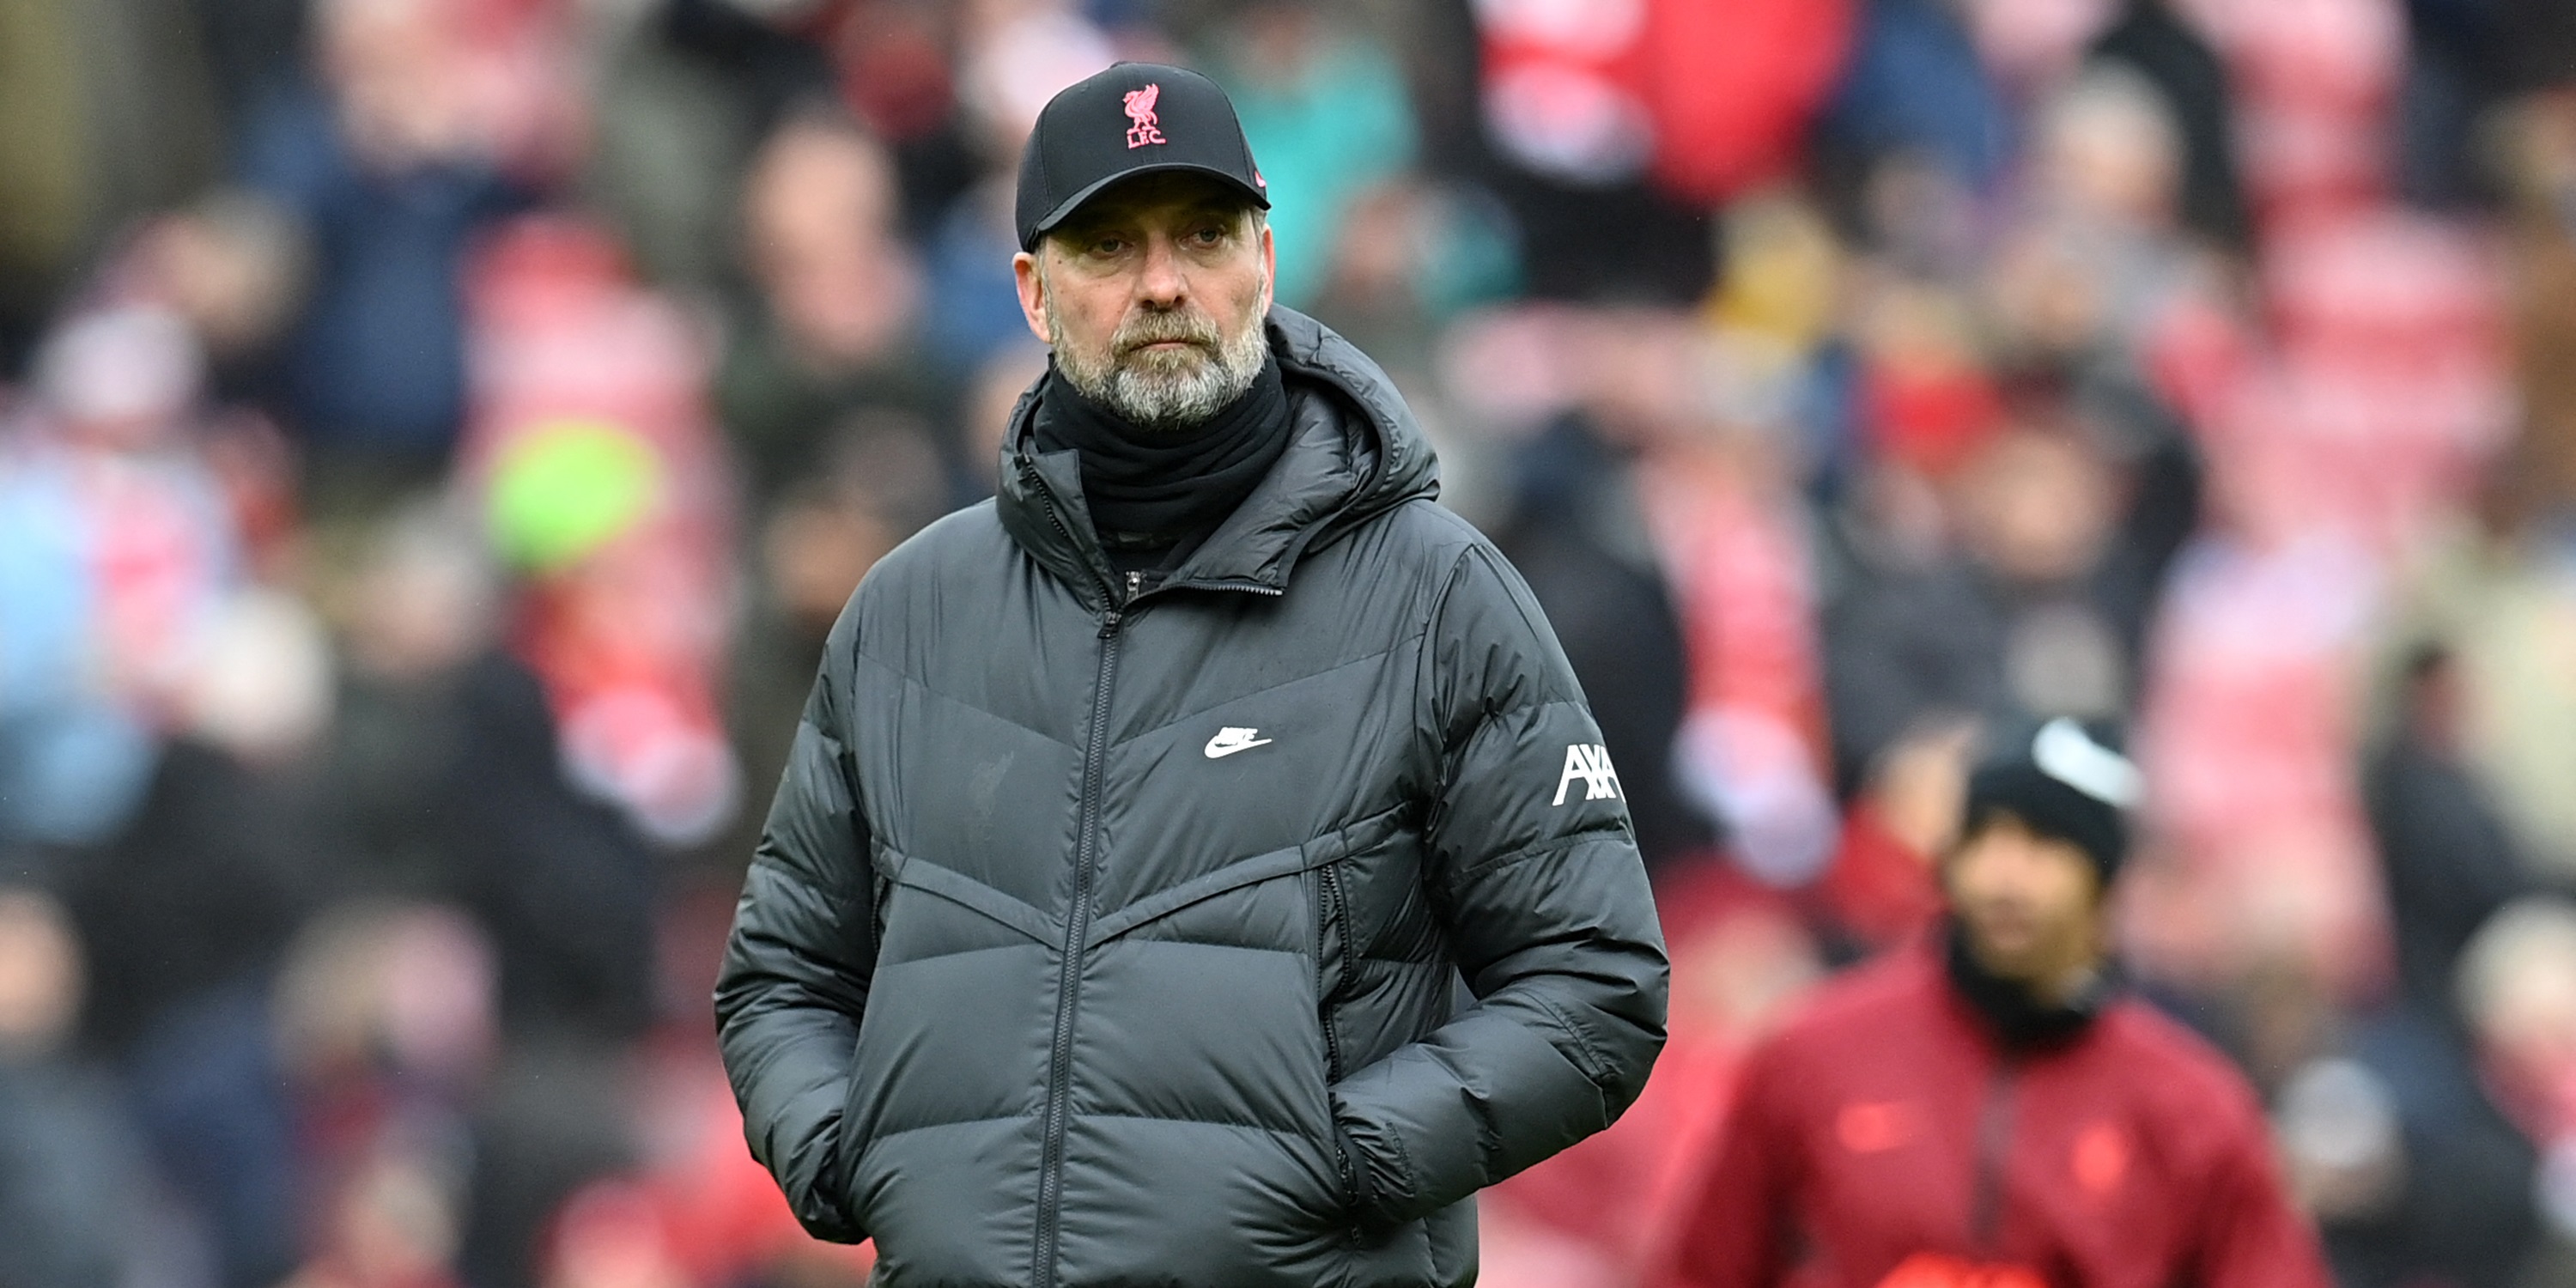 ‘That’s your problem’ – Klopp told to ‘stop trying to change things’ as bugbear persists